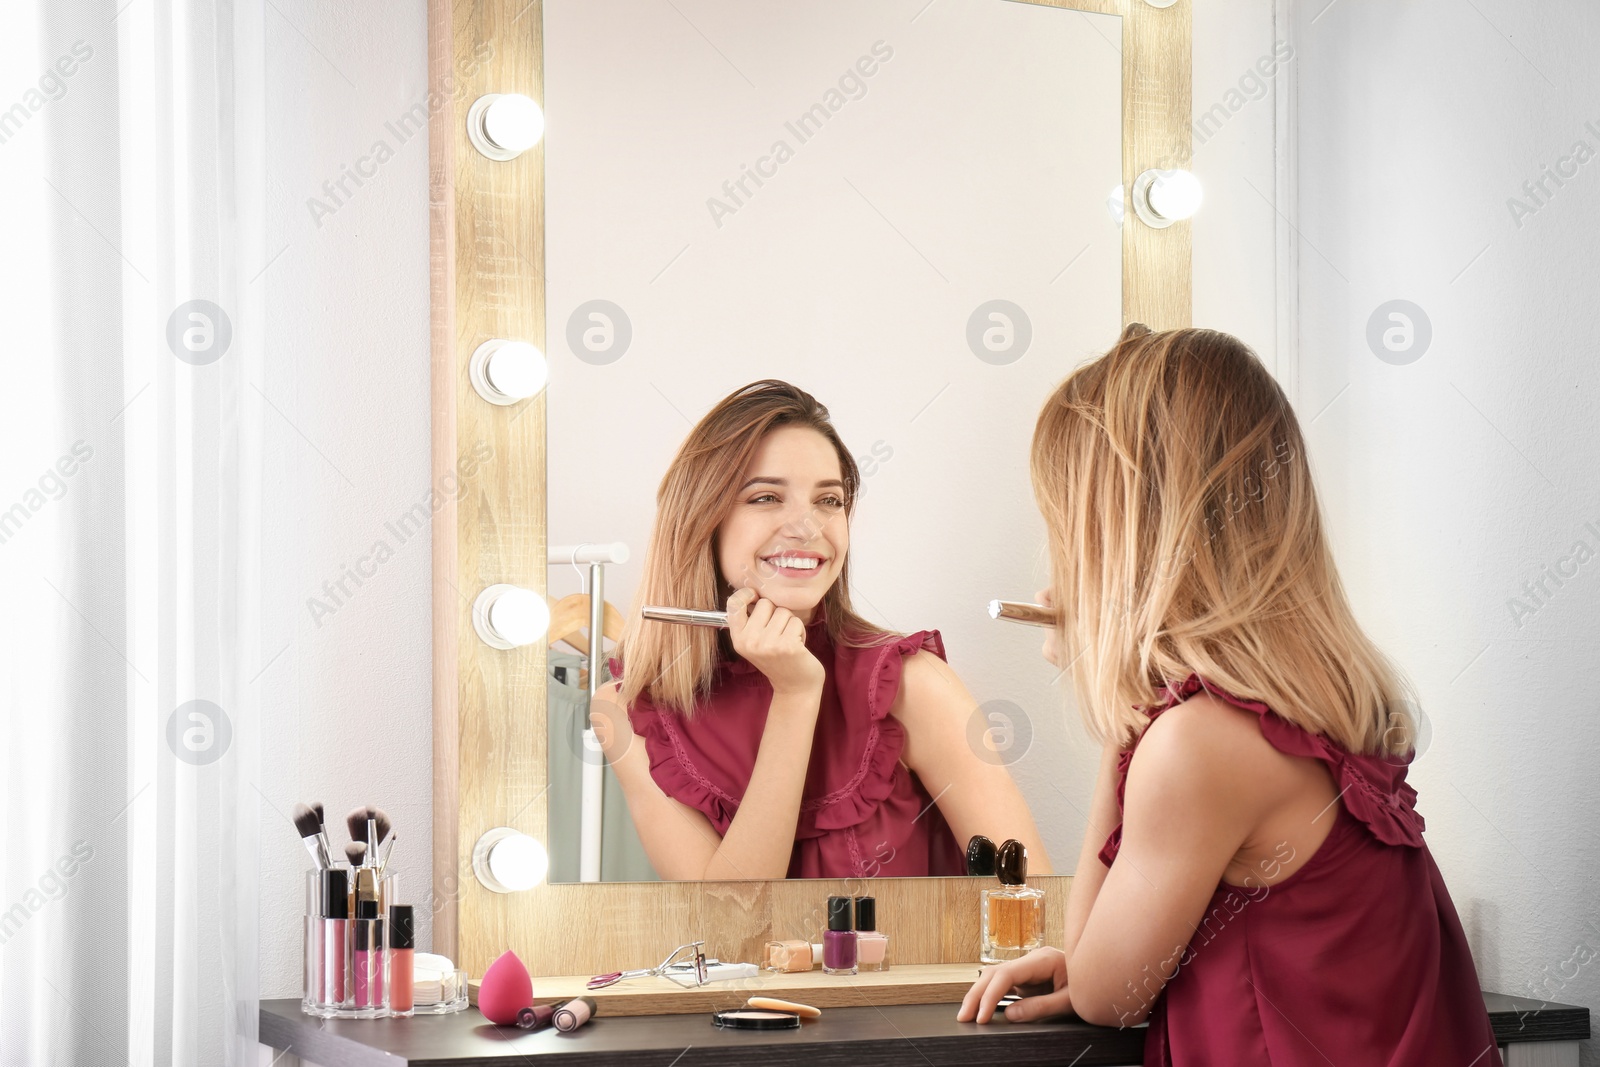 Photo of Woman applying makeup near mirror with light bulbs in dressing room